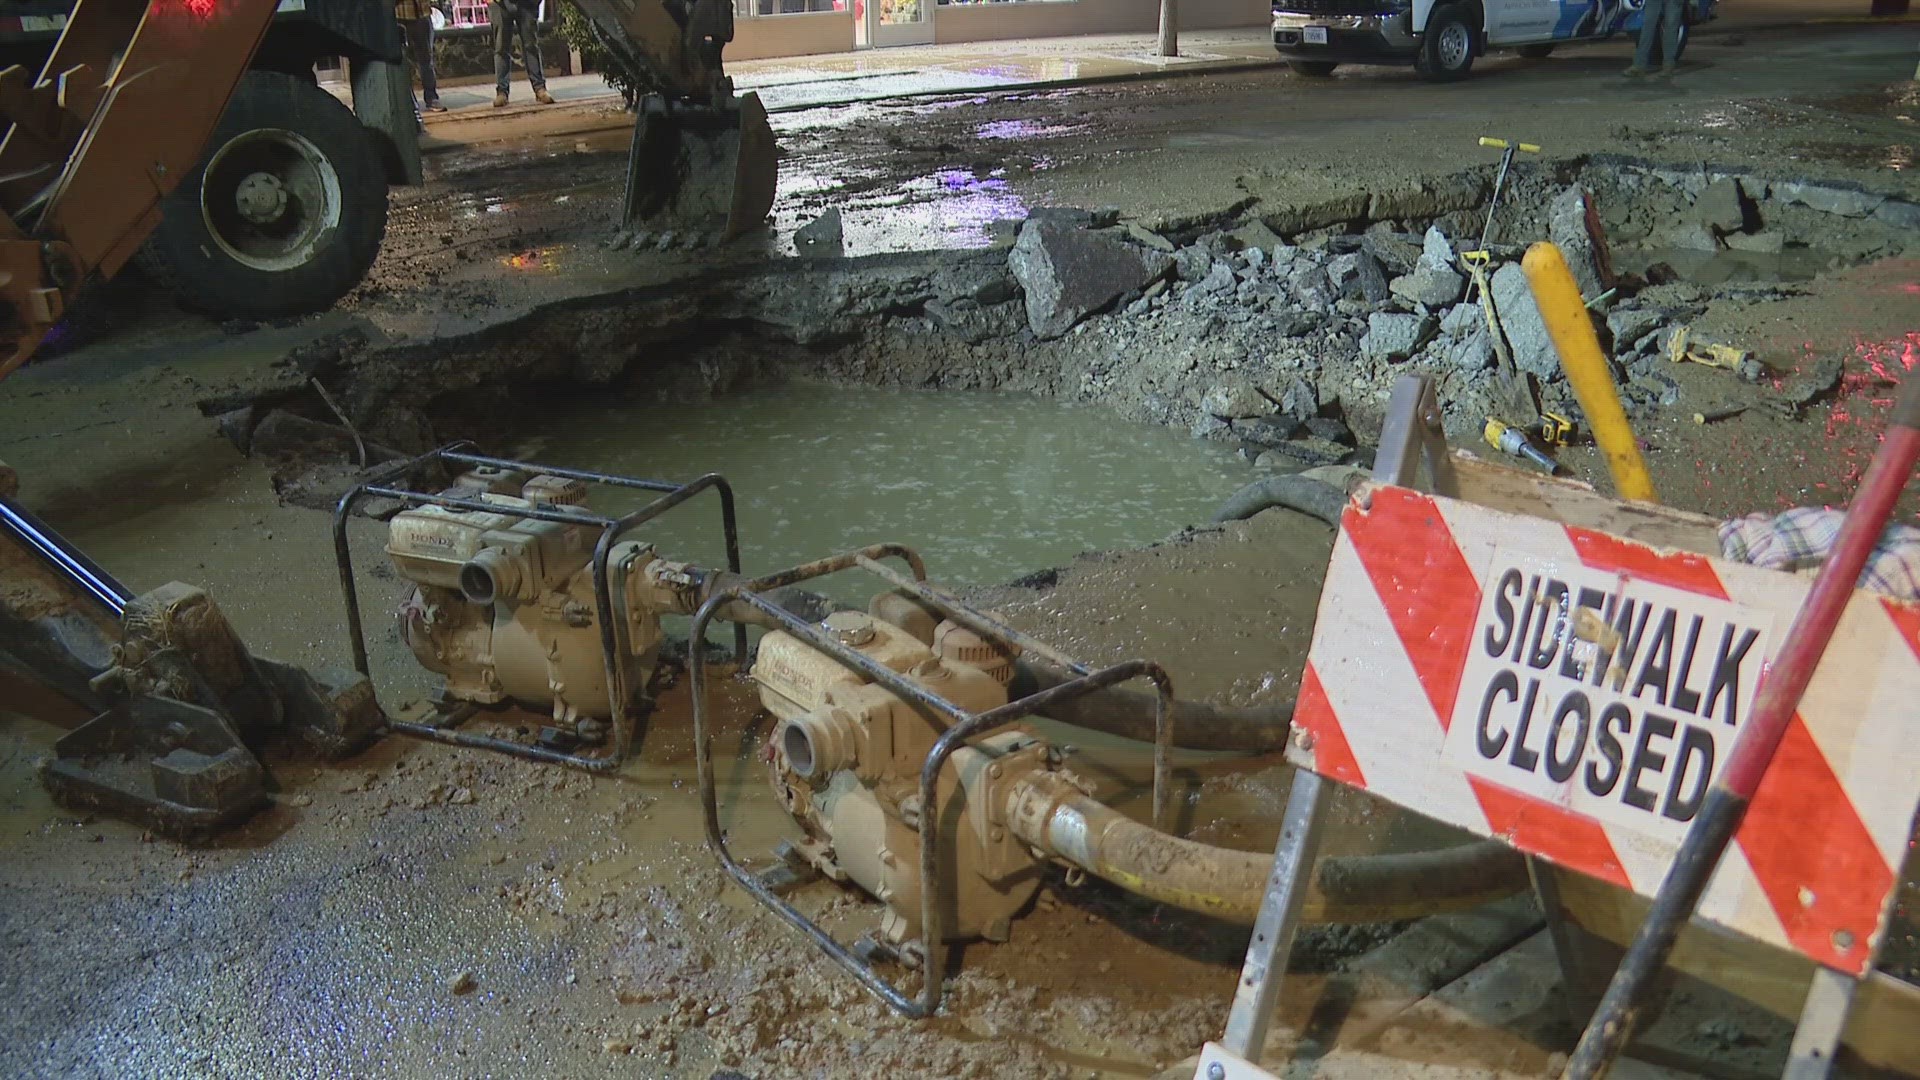 A water main break has closed portions of East Main Street in Belleville, Illinois. Portions of East Main Street from High Street through Charles Street are closed.